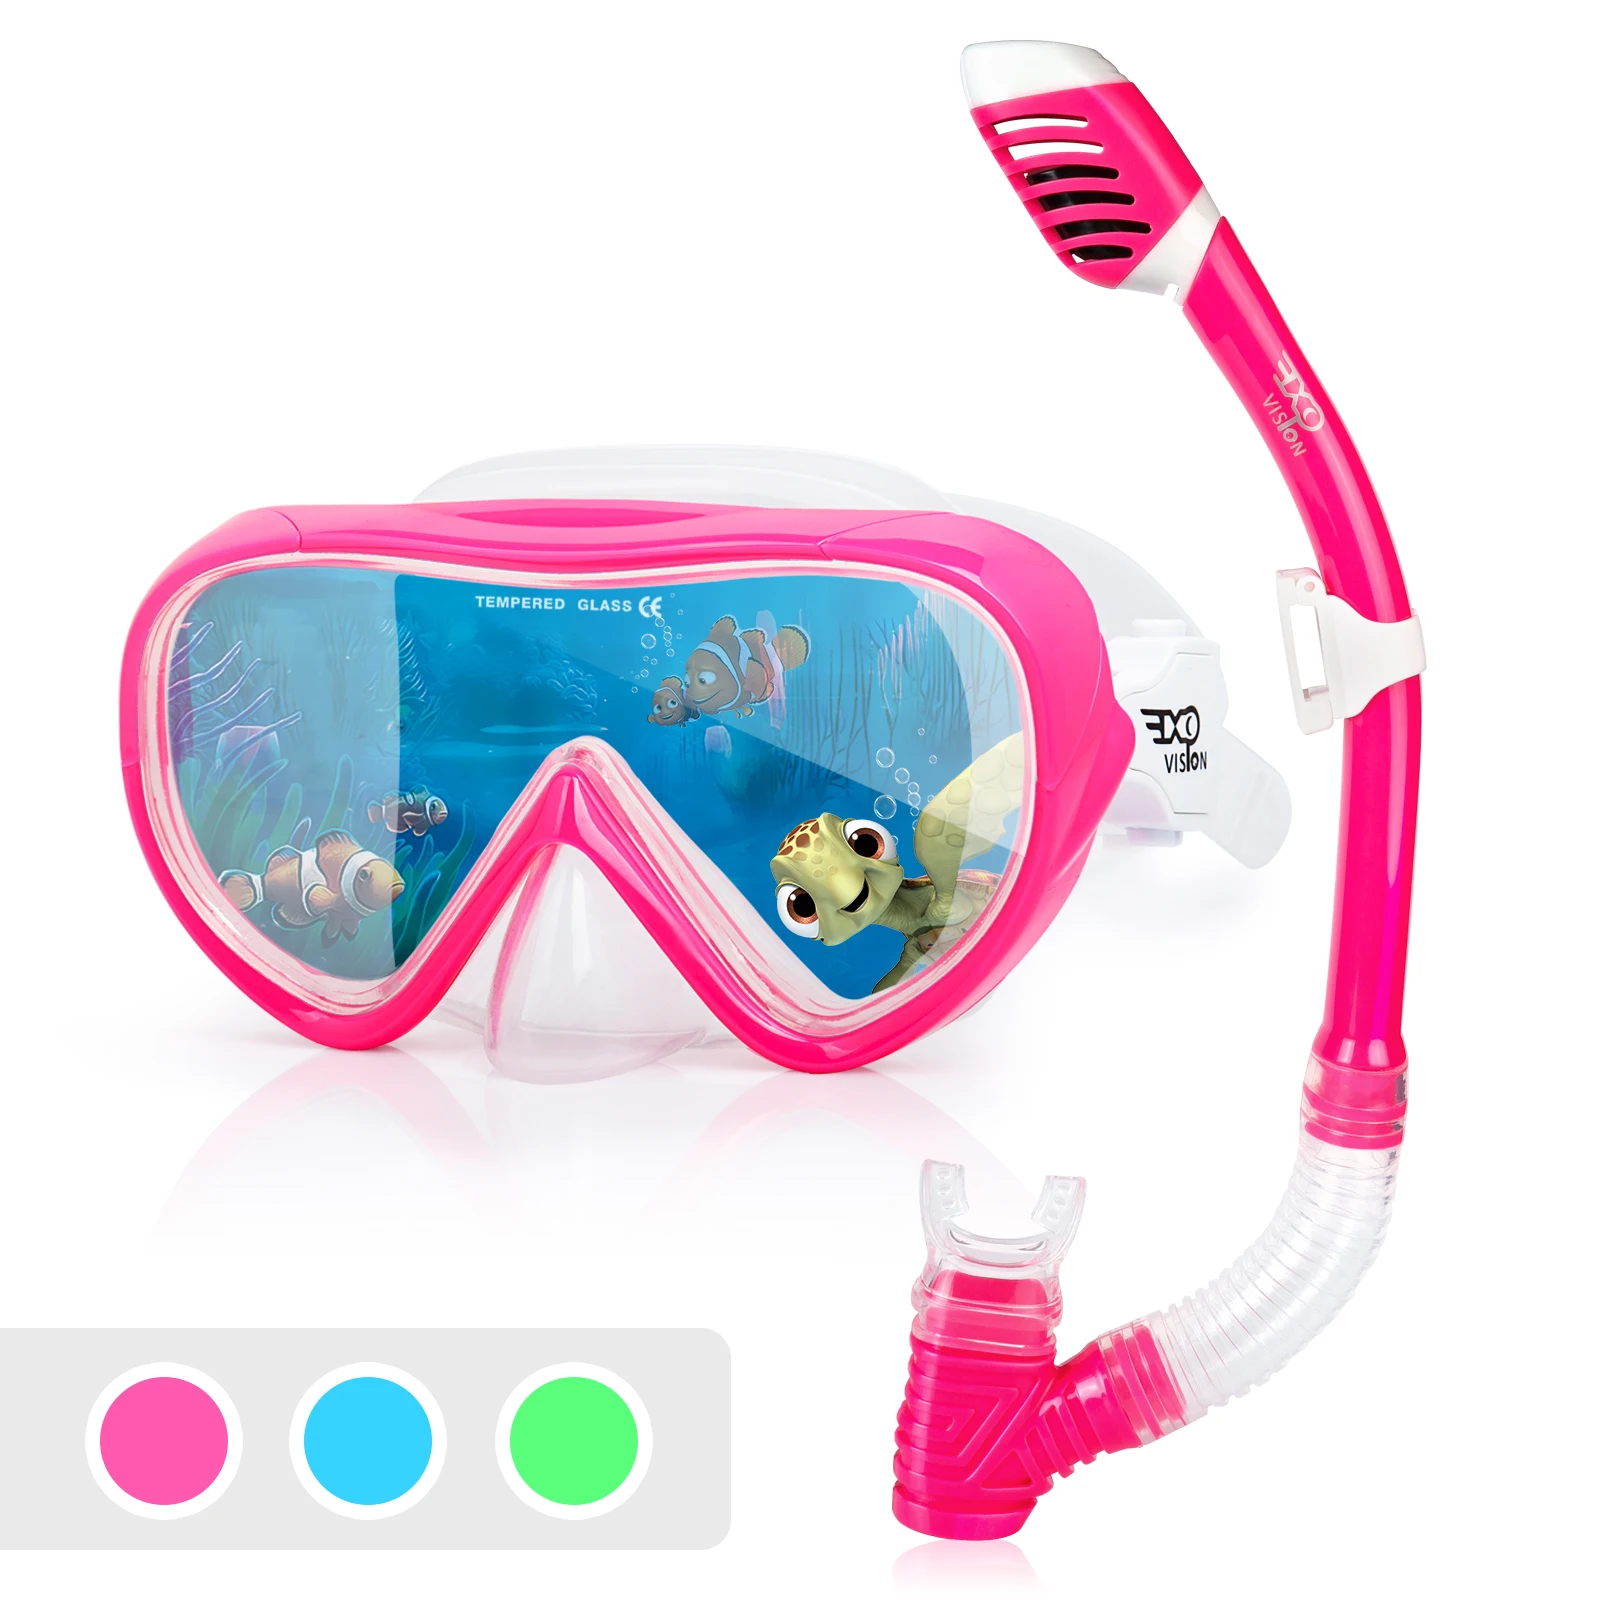 Panoramic Snorkel Mask Set for Kids, Anti-Fog Youth Scuba Diving Mask, Tempered Glasses, Swim Mask, Dry Top Snorkel for Kids